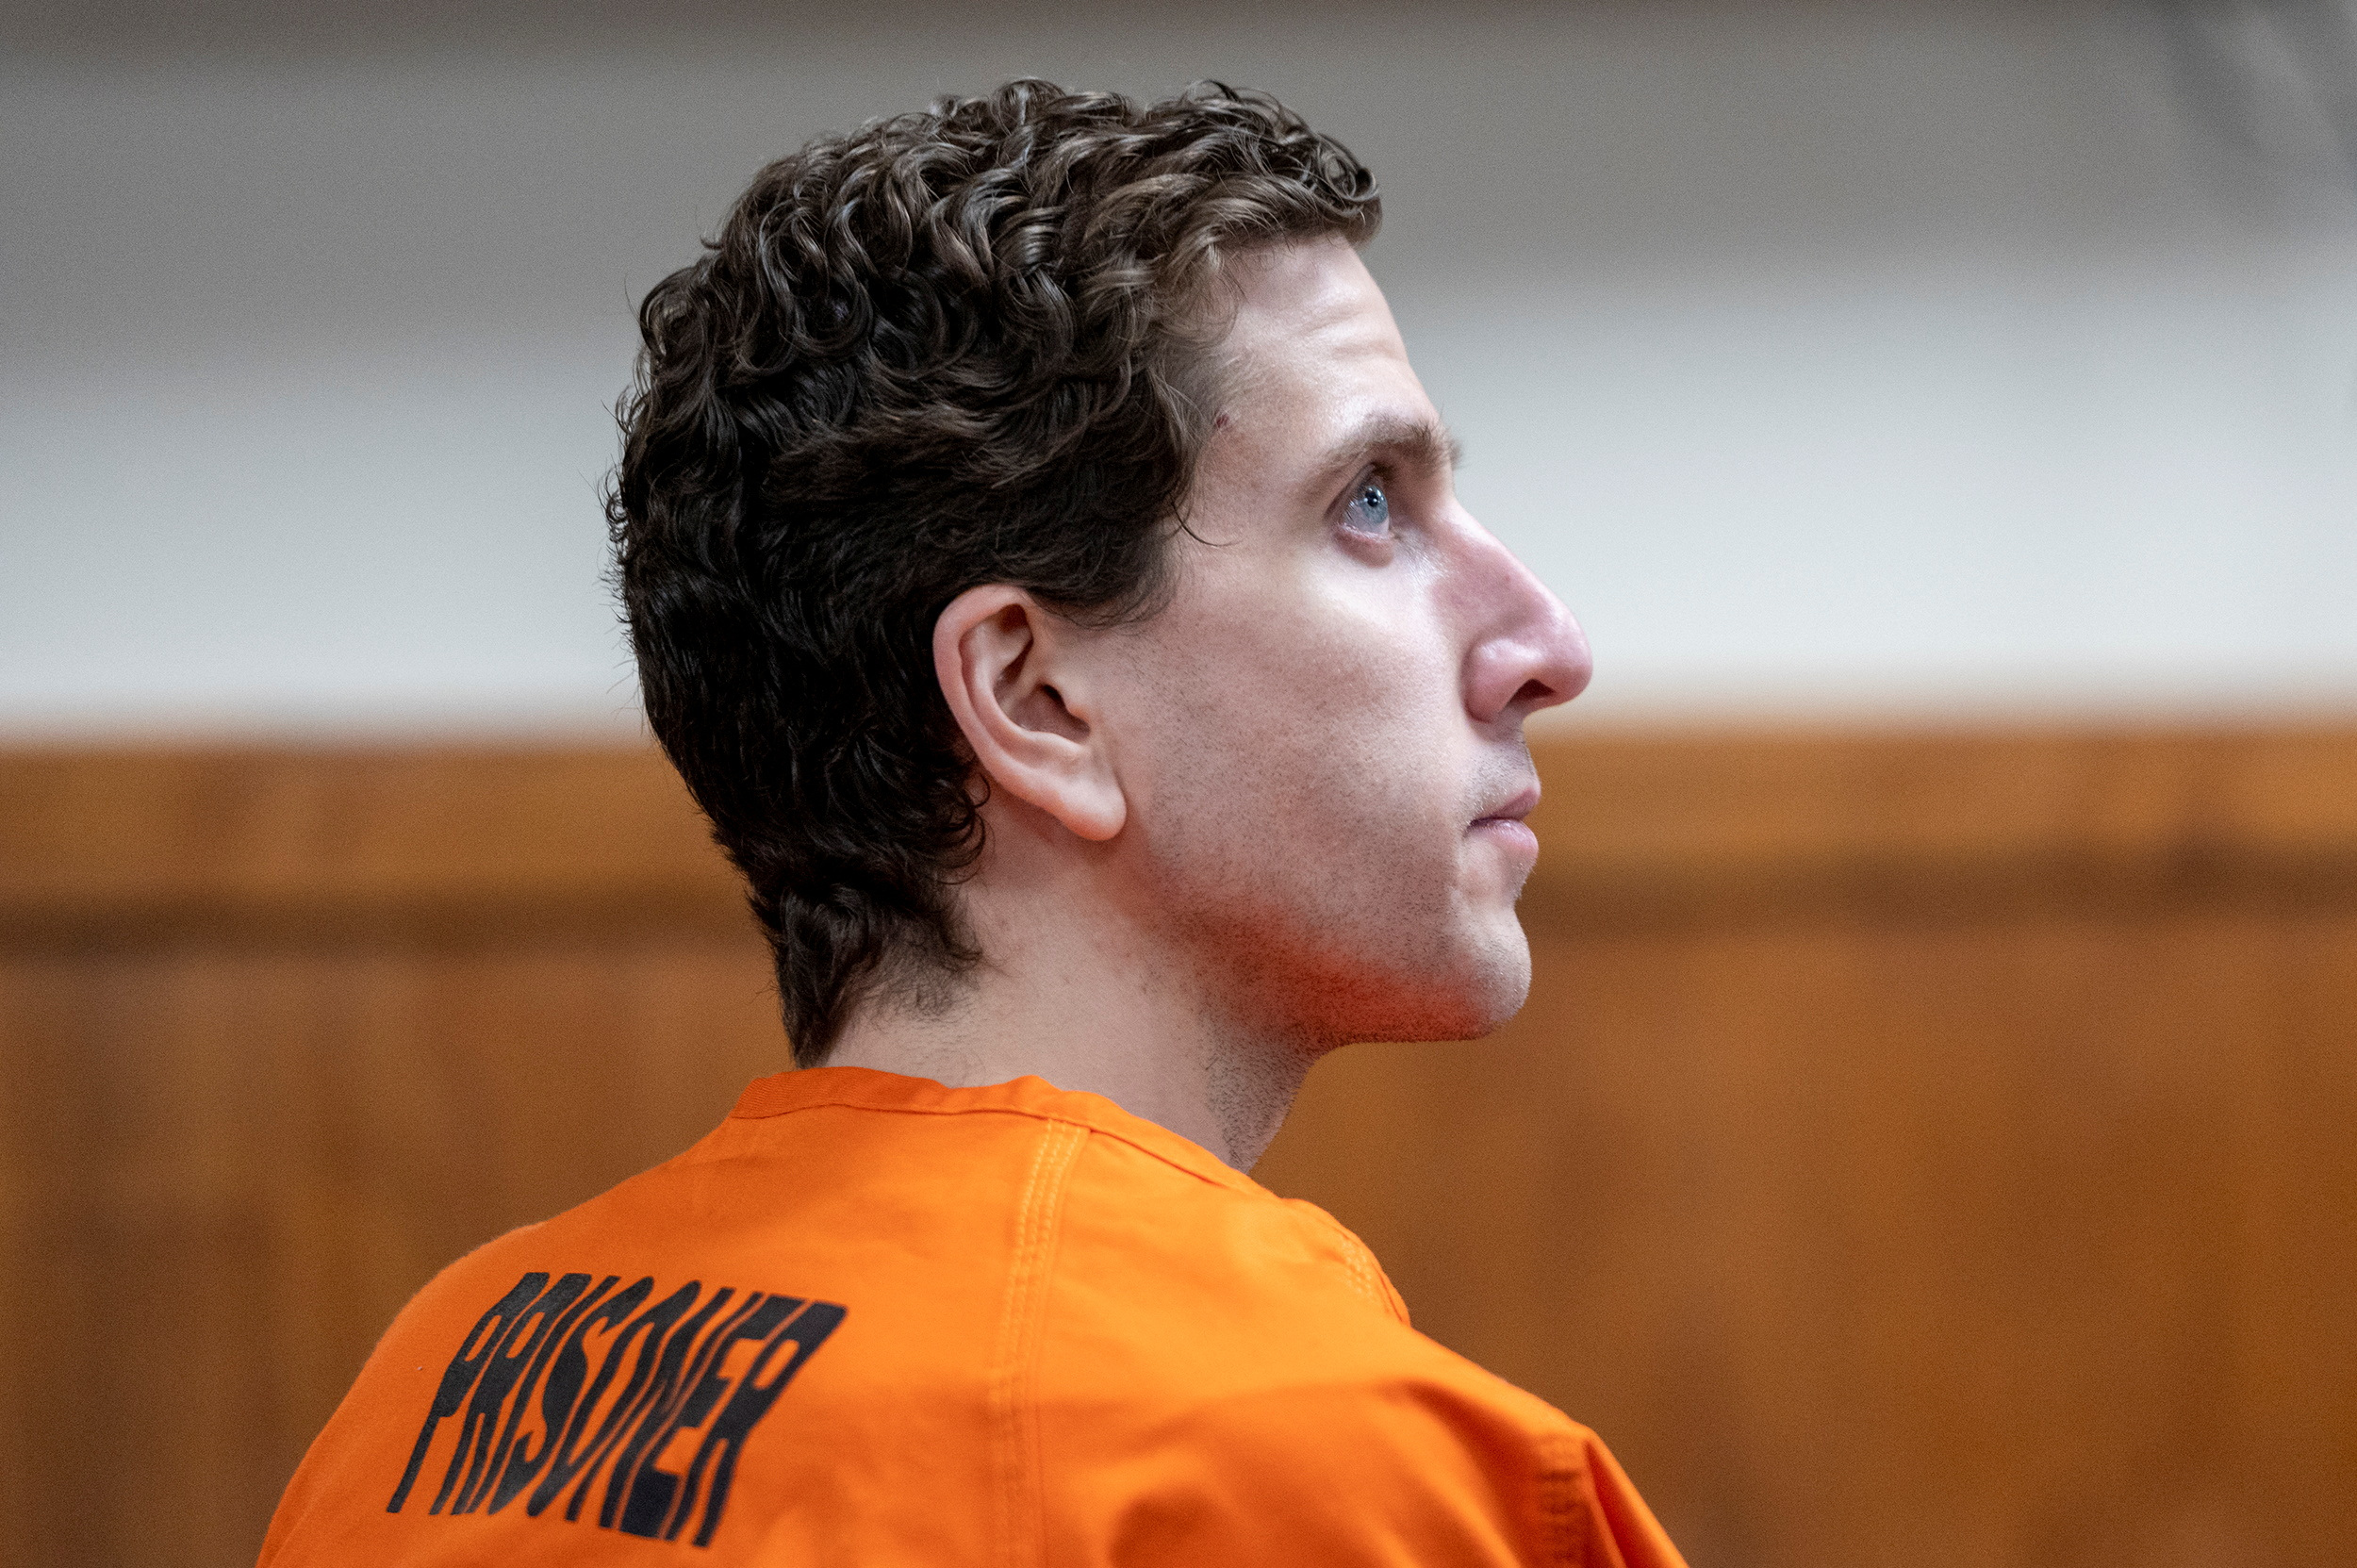 PHOTO: Bryan Kohberger, who is accused of killing four University of Idaho students in November 2022, listens during his arraignment hearing in Latah County District Court, Monday, May 22, 2023, in Moscow, Idaho.